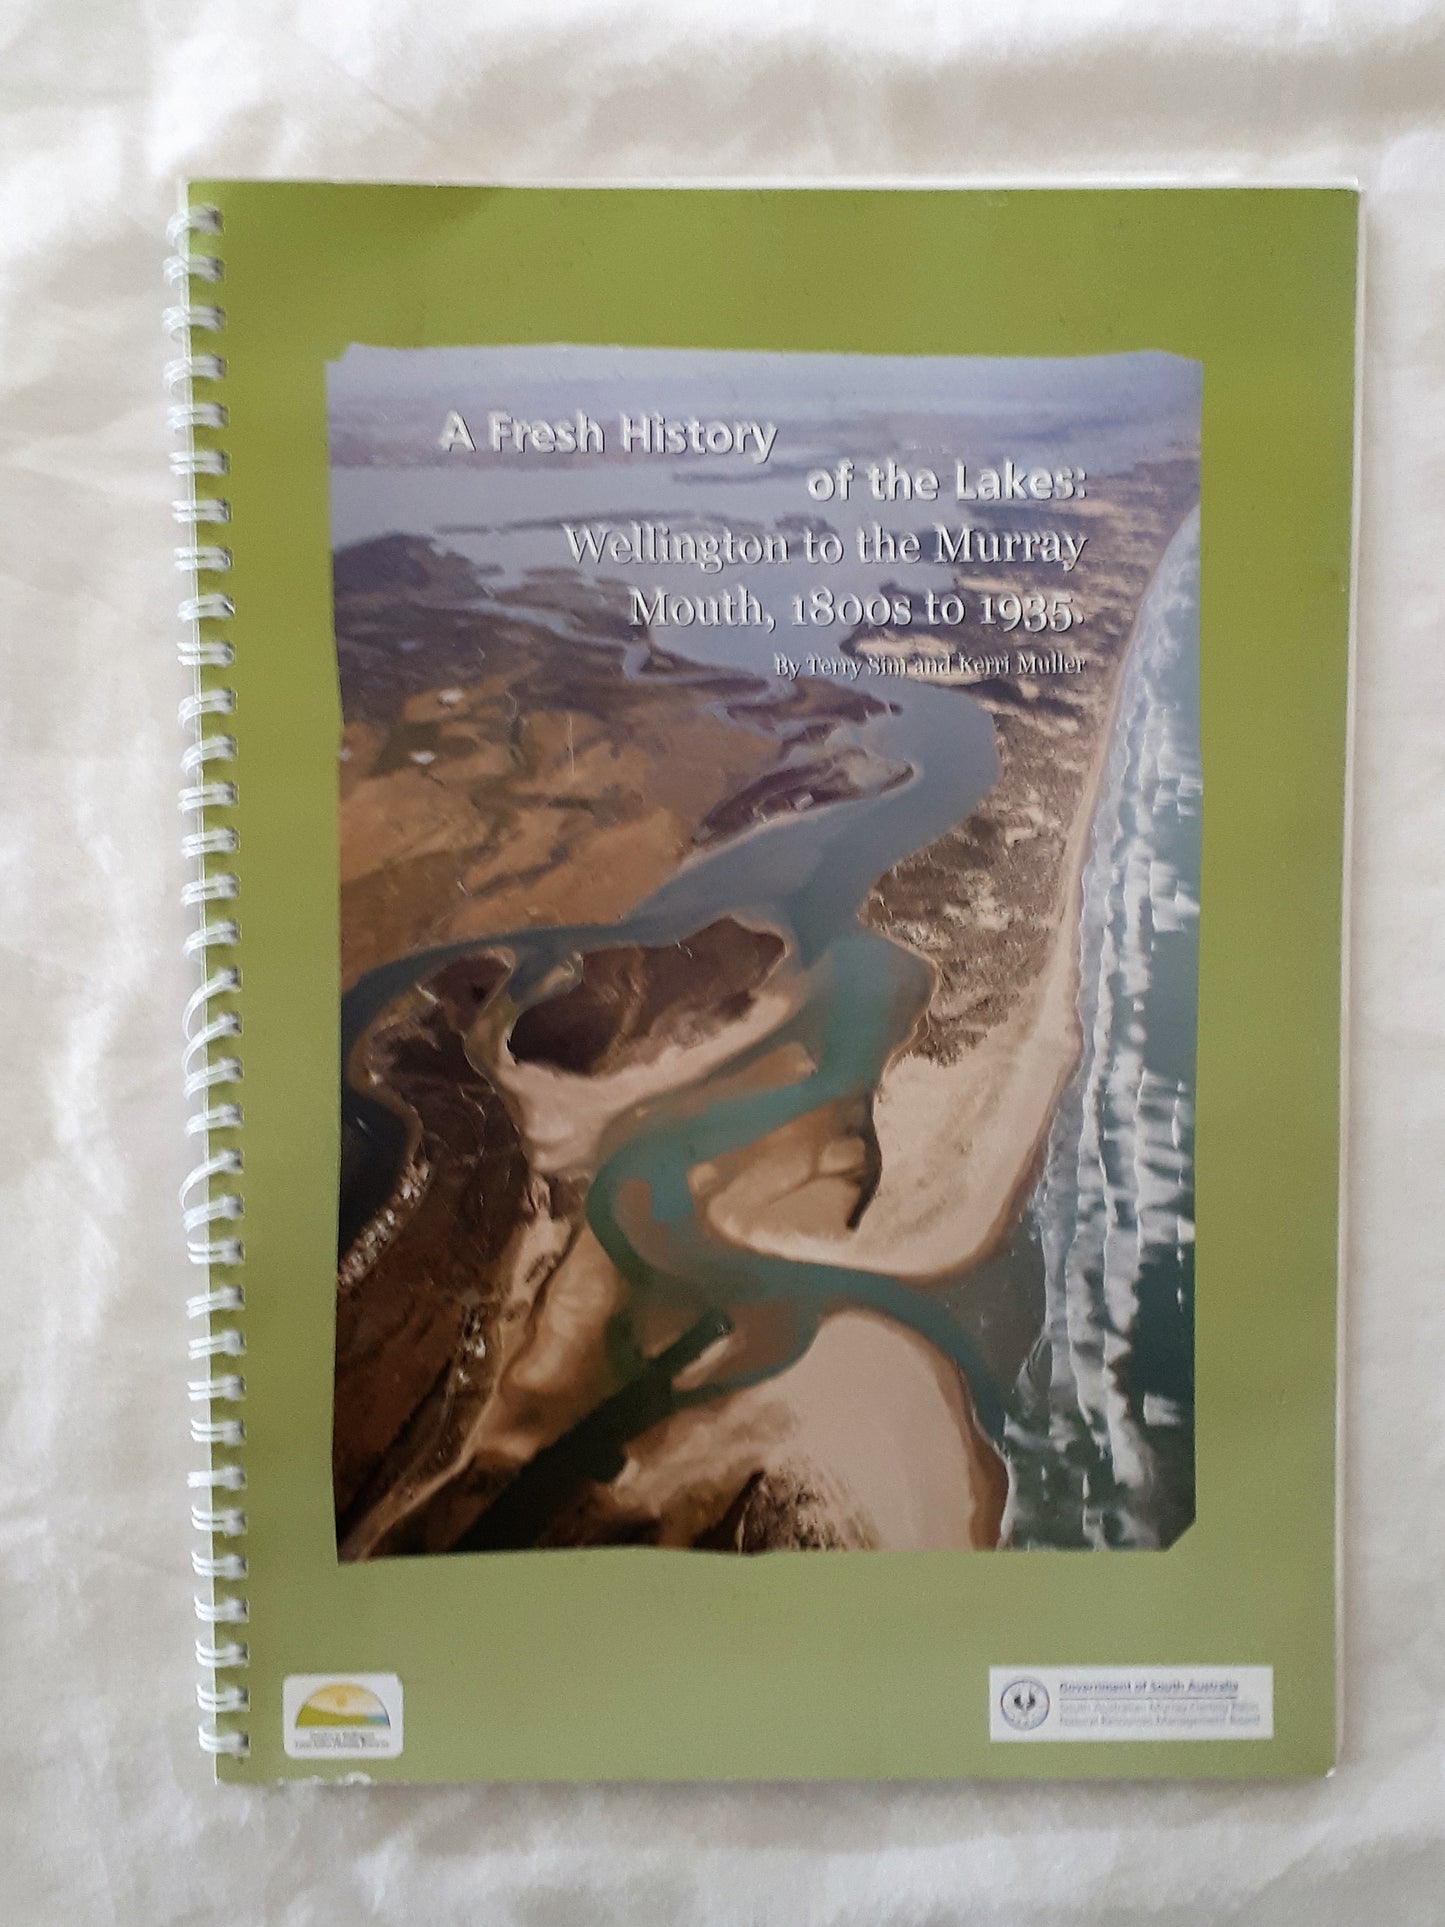 A Fresh History of the Lakes by Terry Sim and Kerri Muller